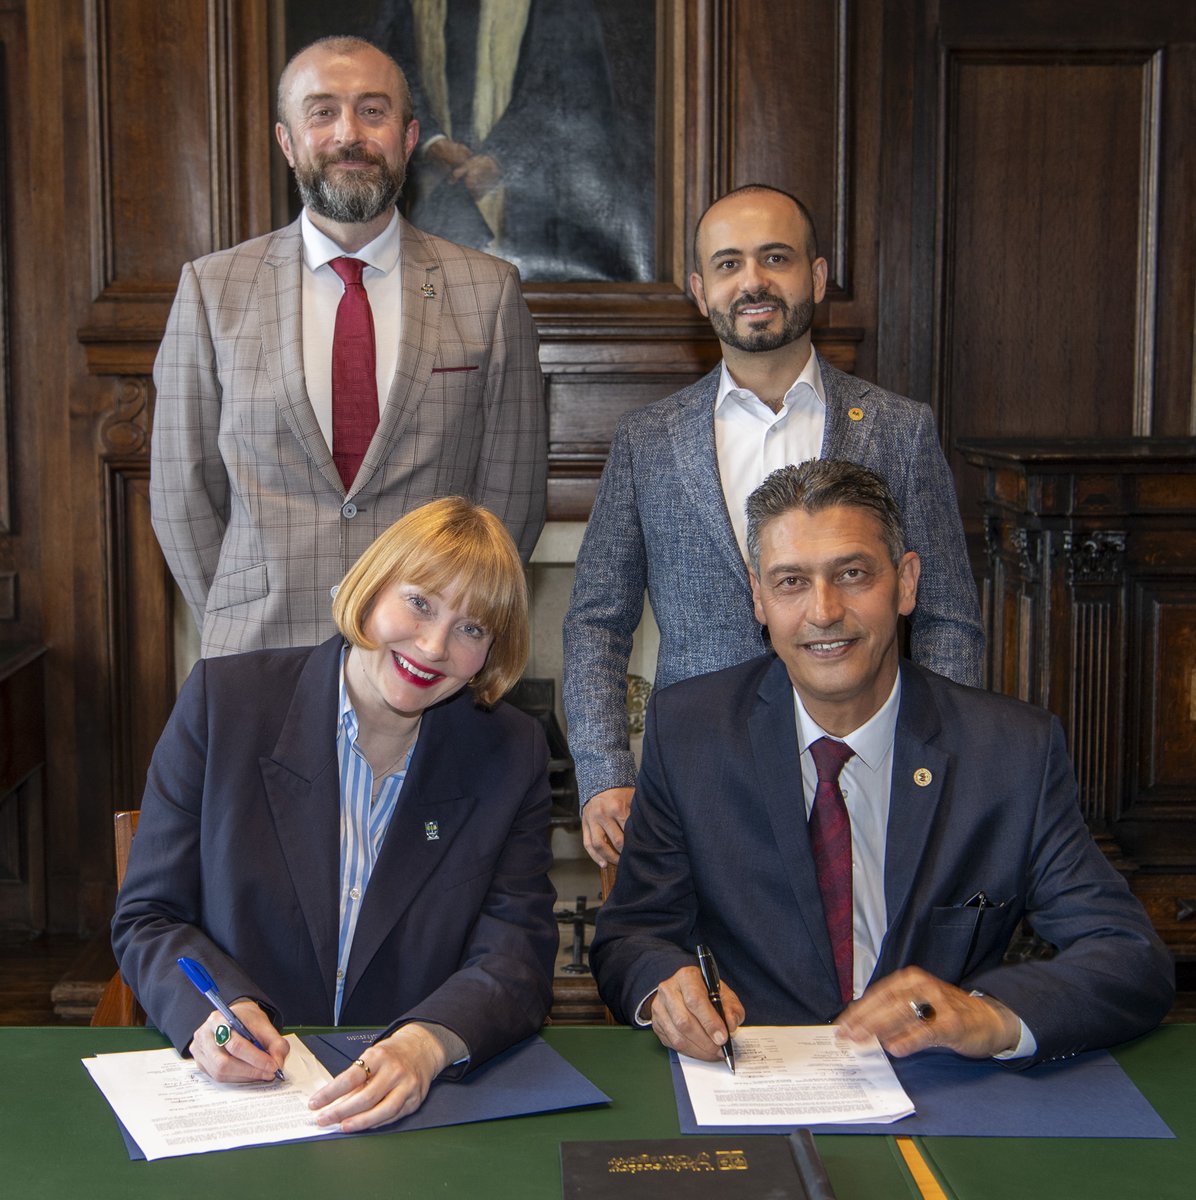 We have signed a Memorandum of Understanding (MoU) with the Arab American University Palestine (AAUP) to promote medical collaboration, including hosting students from AAUP in Glasgow, to gain experience of clinical practice in the UK. Read more ➡️ gla.ac/3JPCaDD